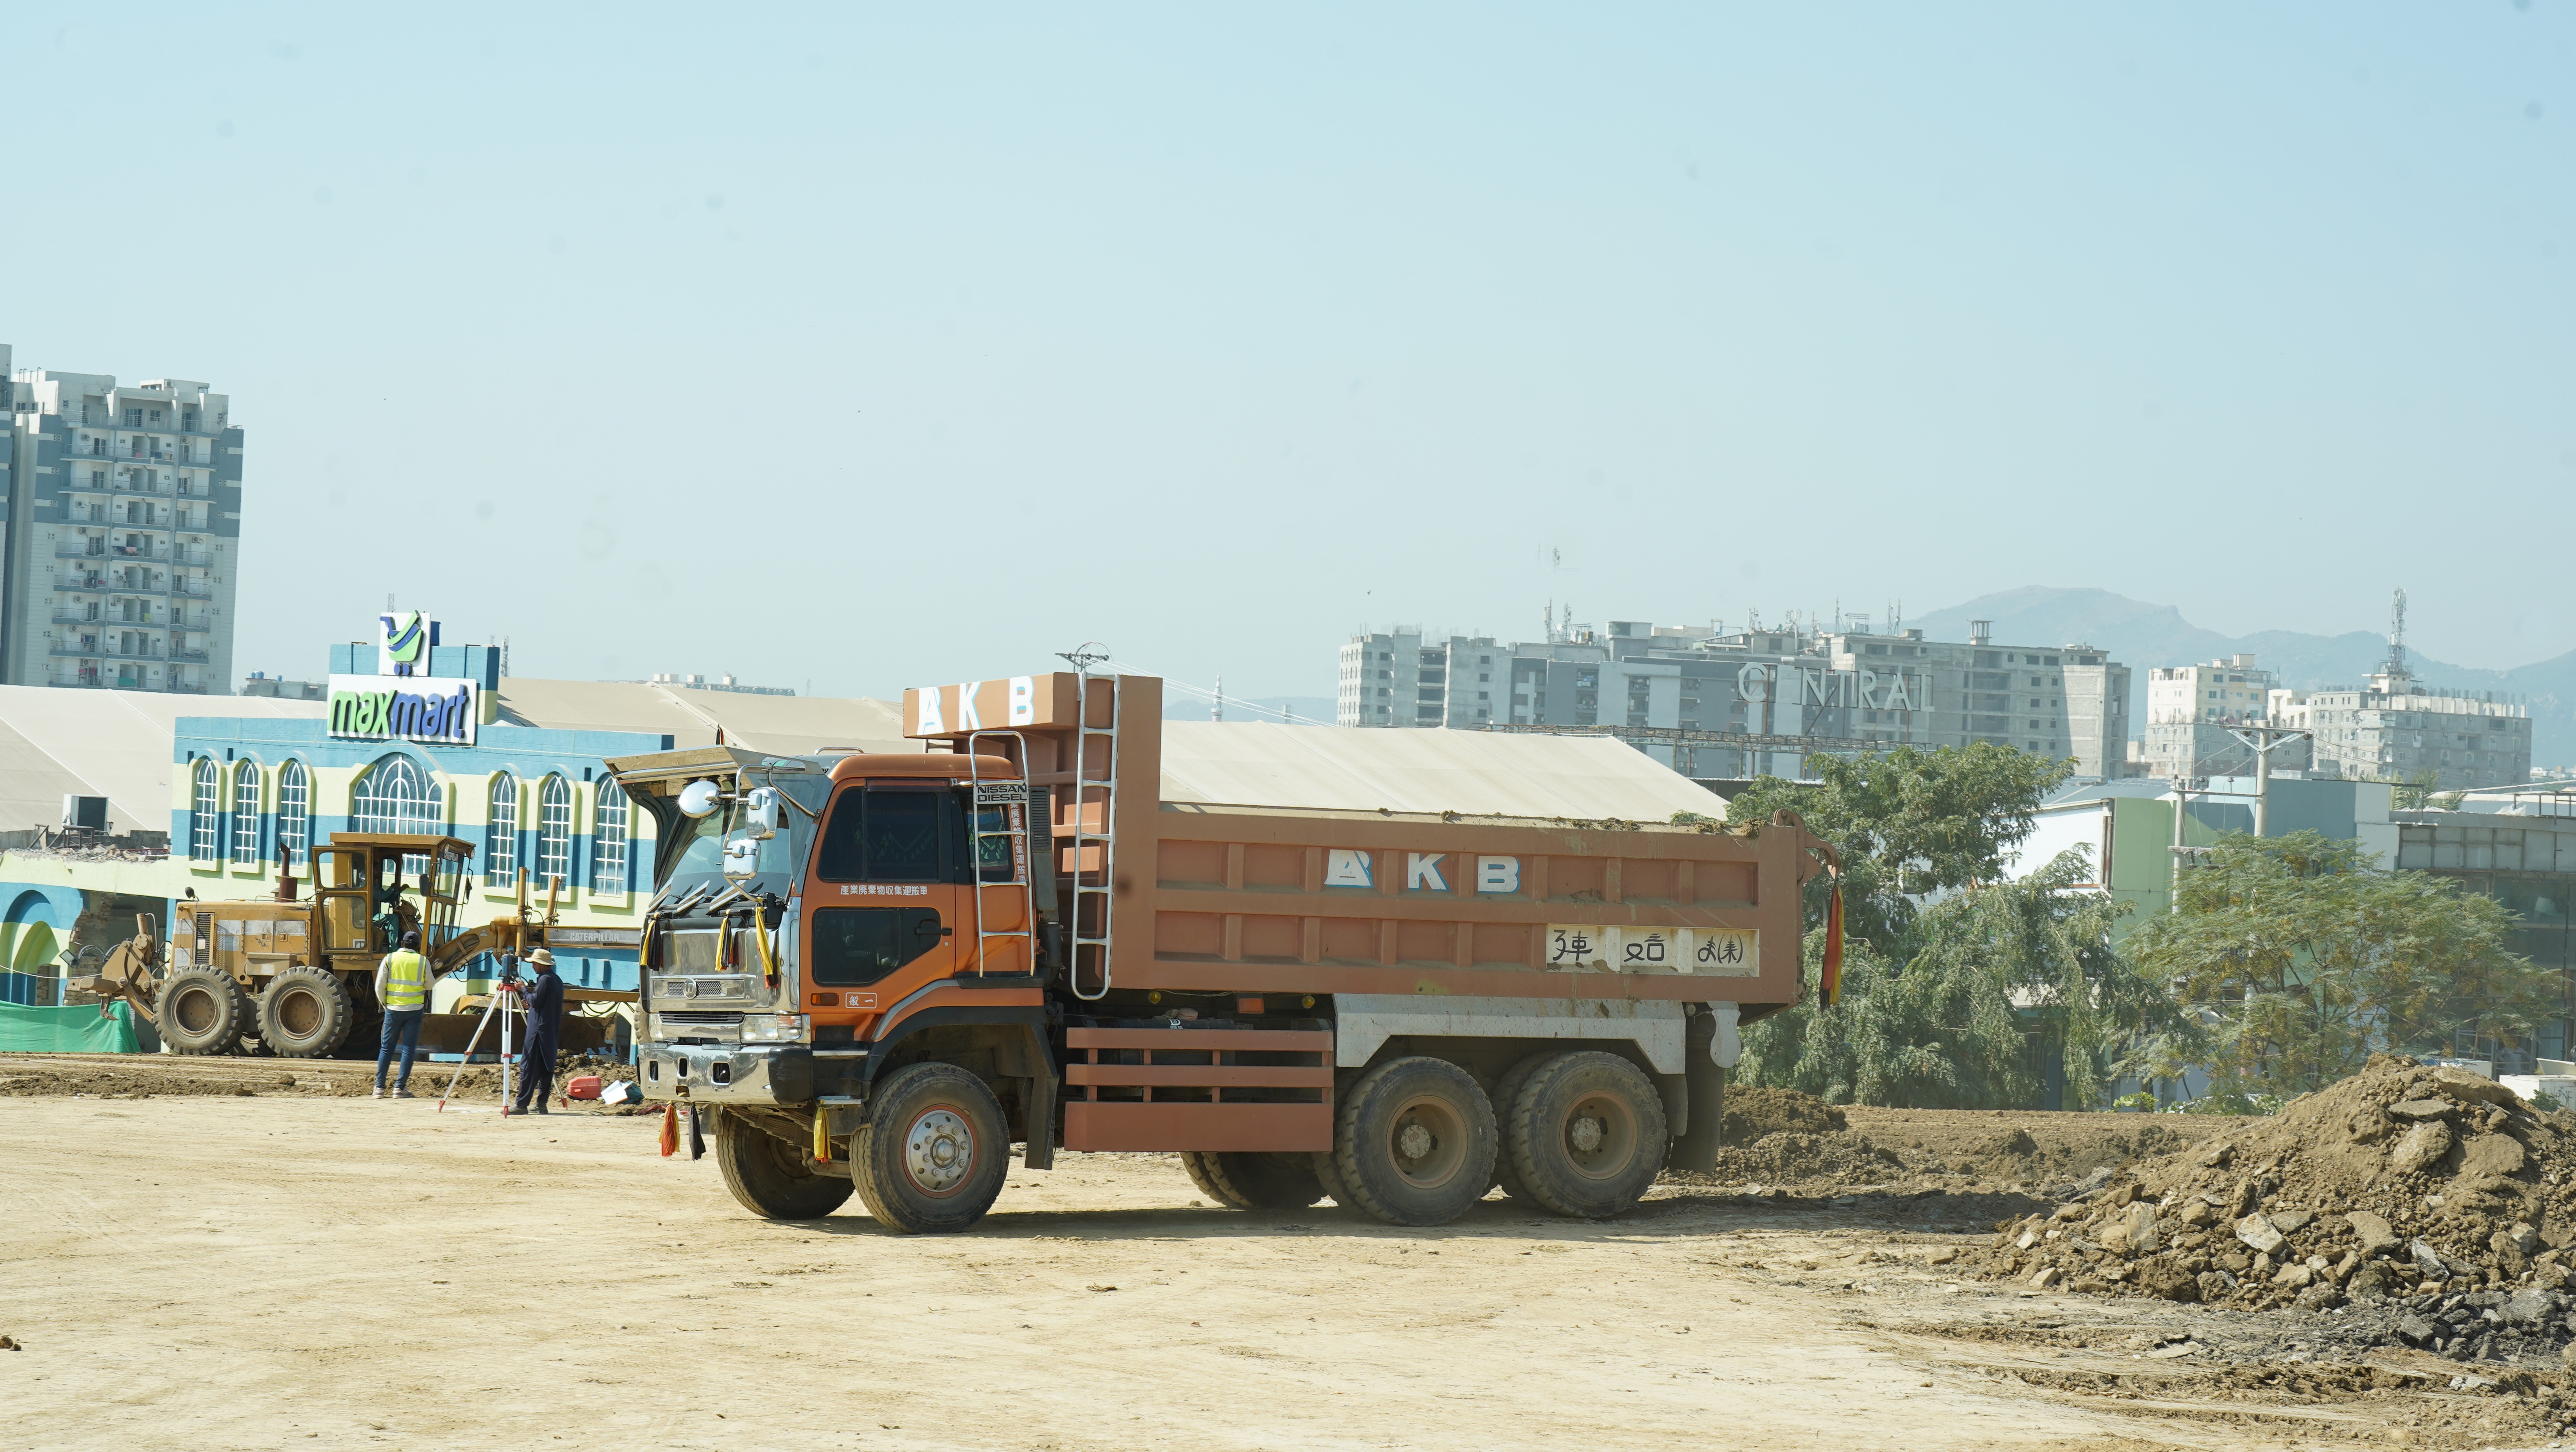 Heavy machinery deployed by the National Logistic Cell (NLC) at the construction site in the remote areas of Federal Capital of Pakistan